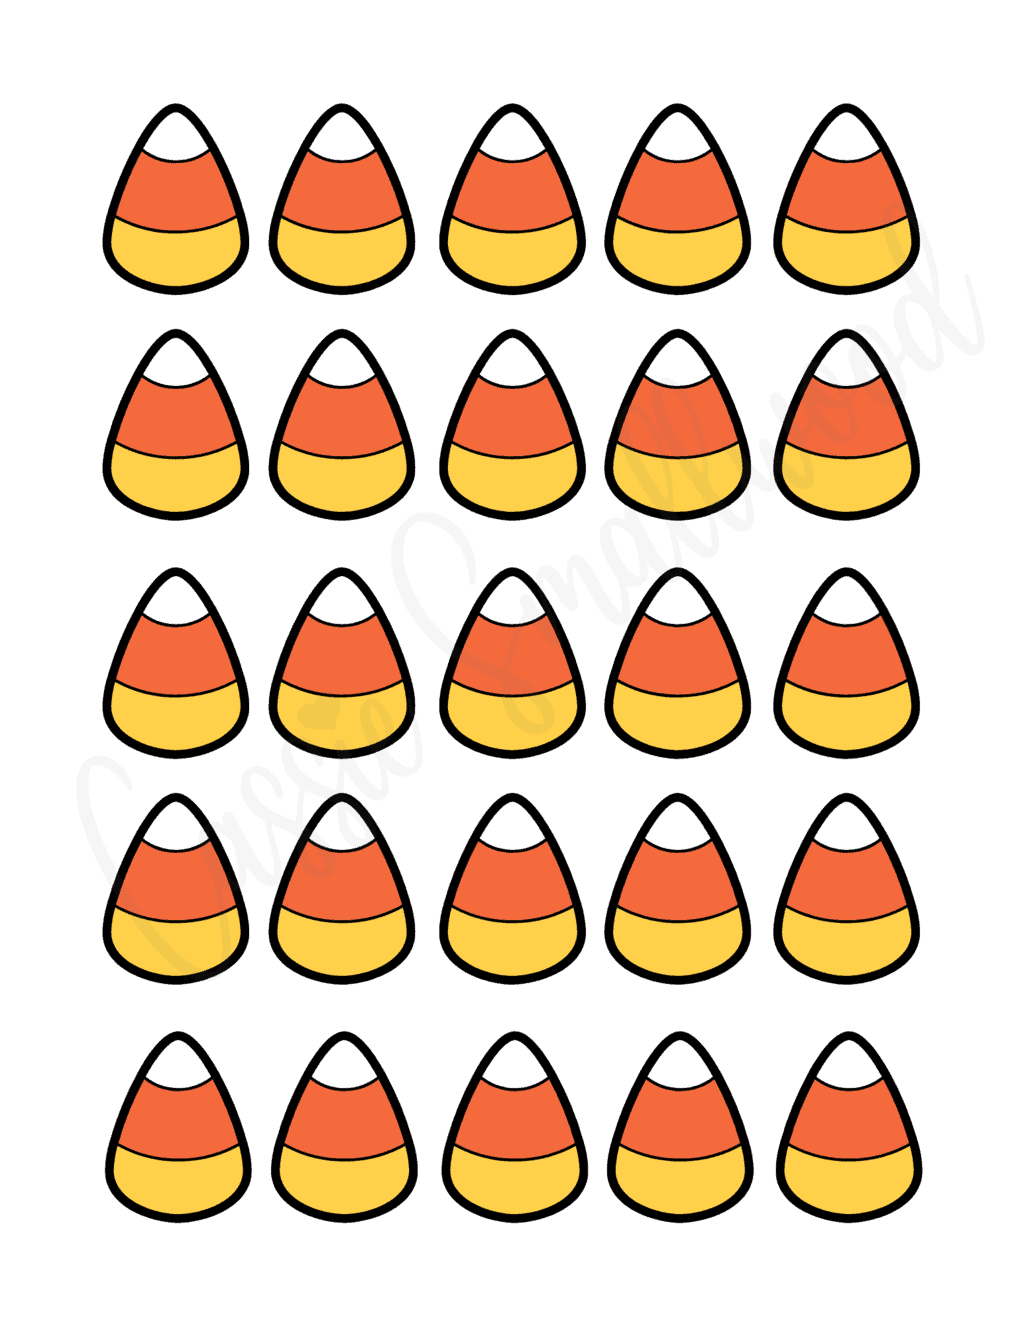 9 Cute Candy Corn Templates (Black And White + Color) Cassie Smallwood